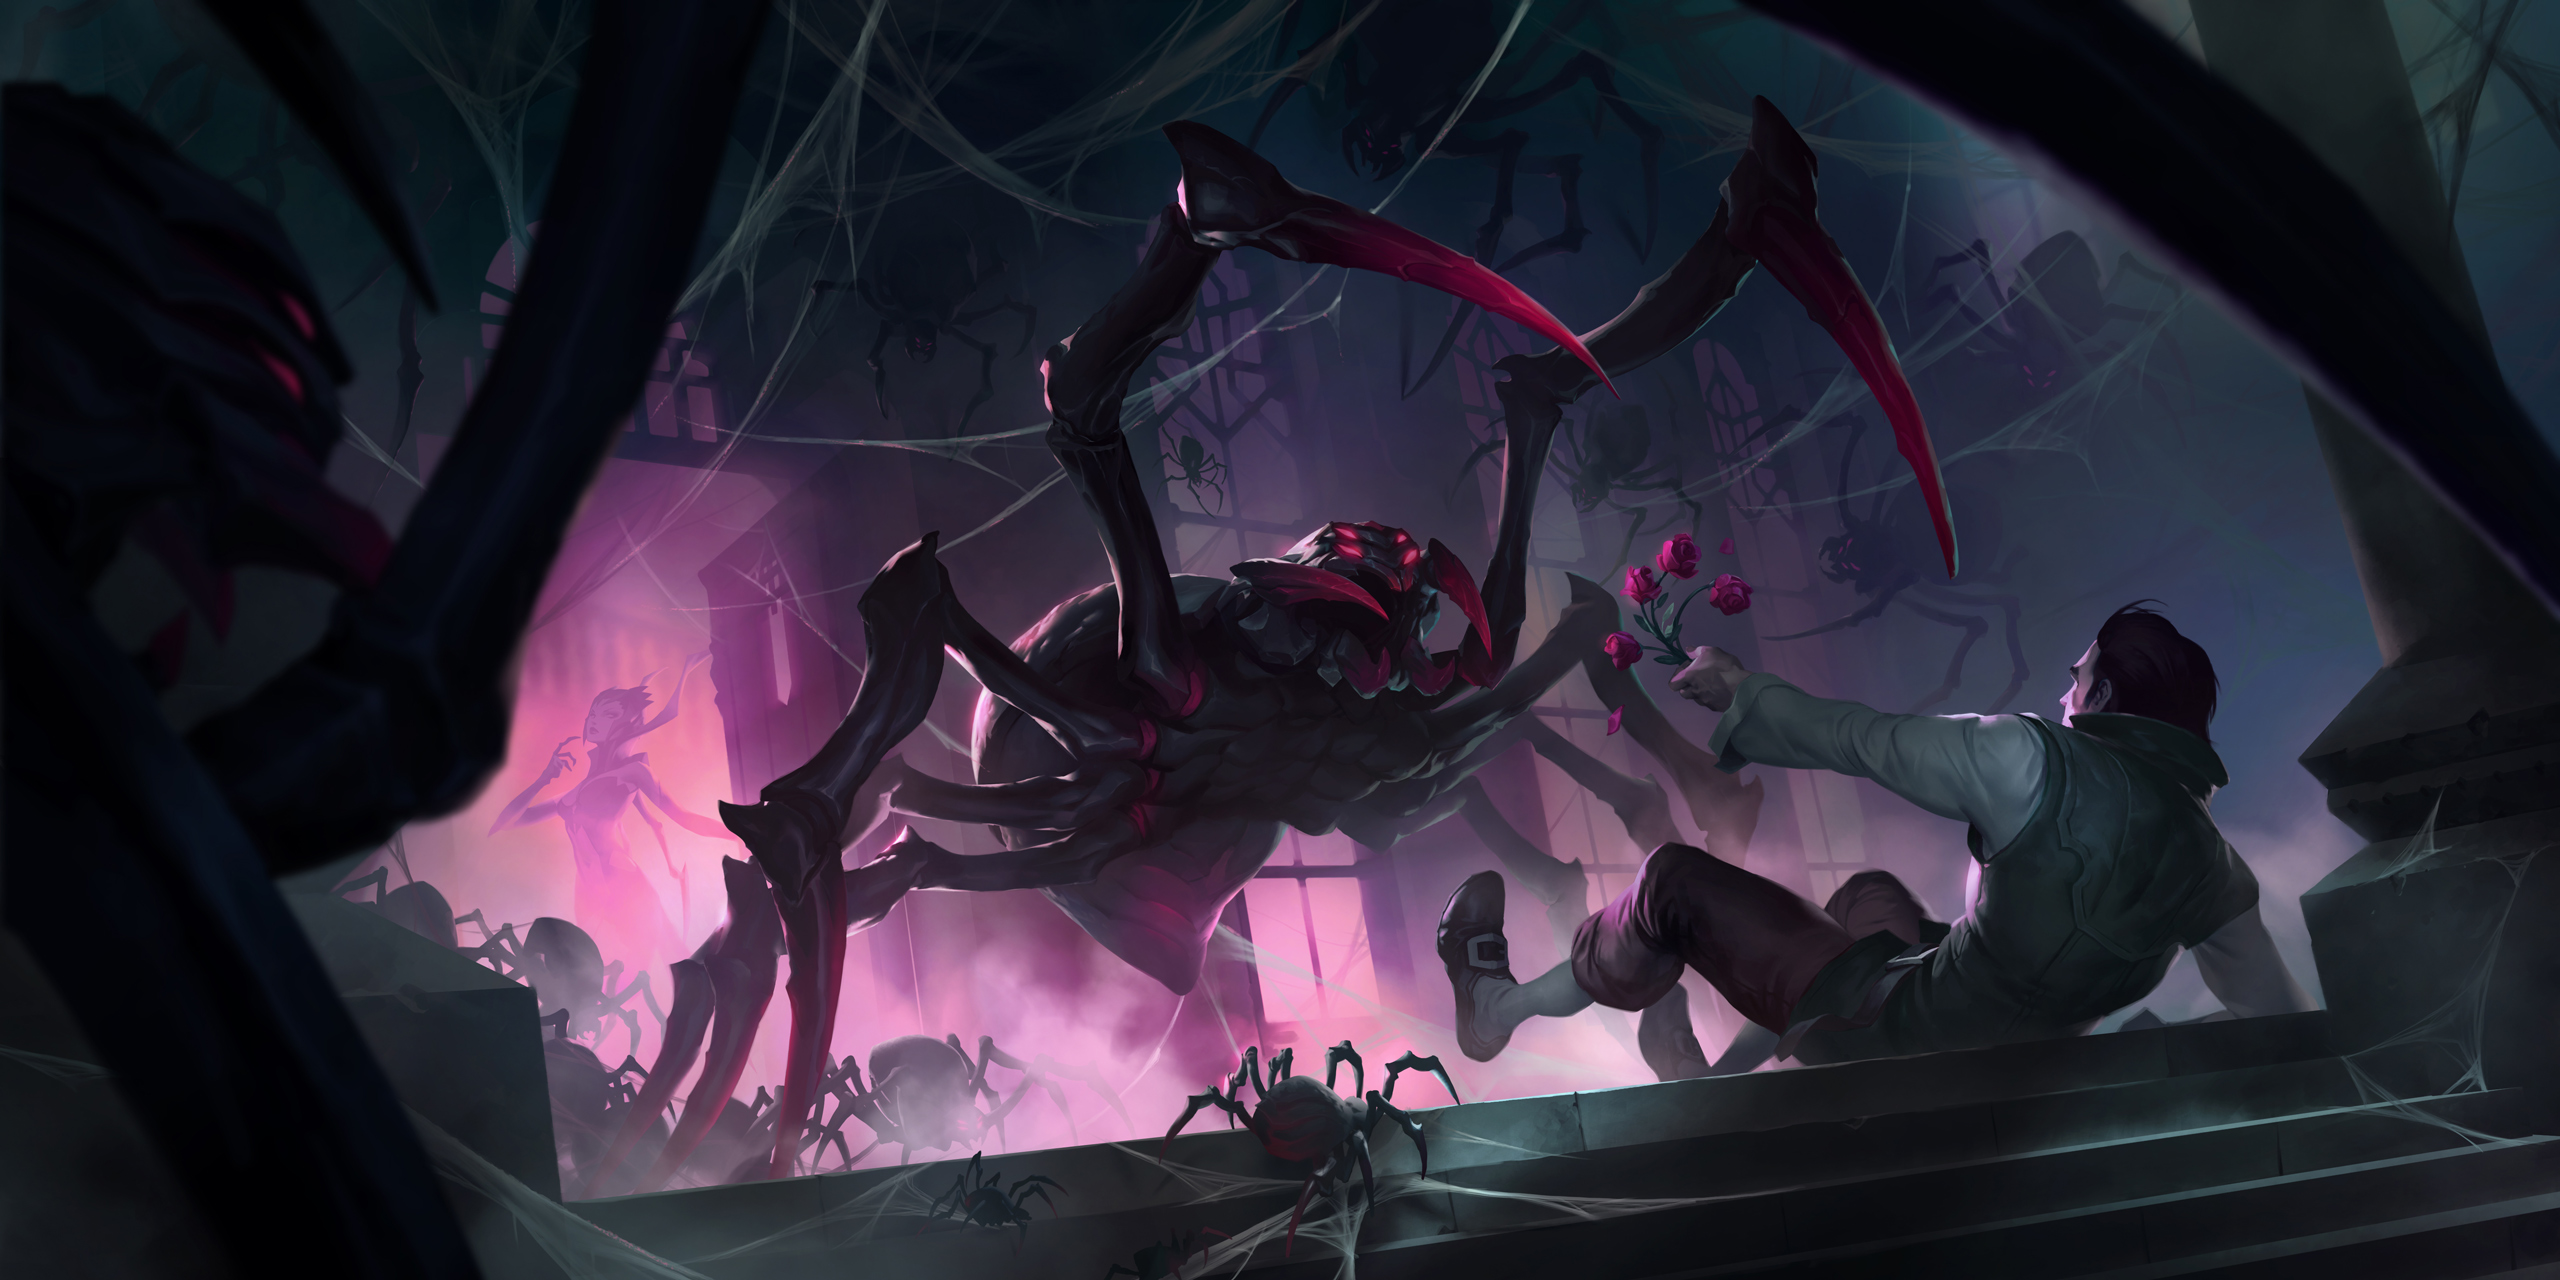 League of Legends Elise wallpaper Resolution 2560x1280 | Best Download this awesome wallpaper - Cool Wallpaper HD - CoolWallpaper-HD.com